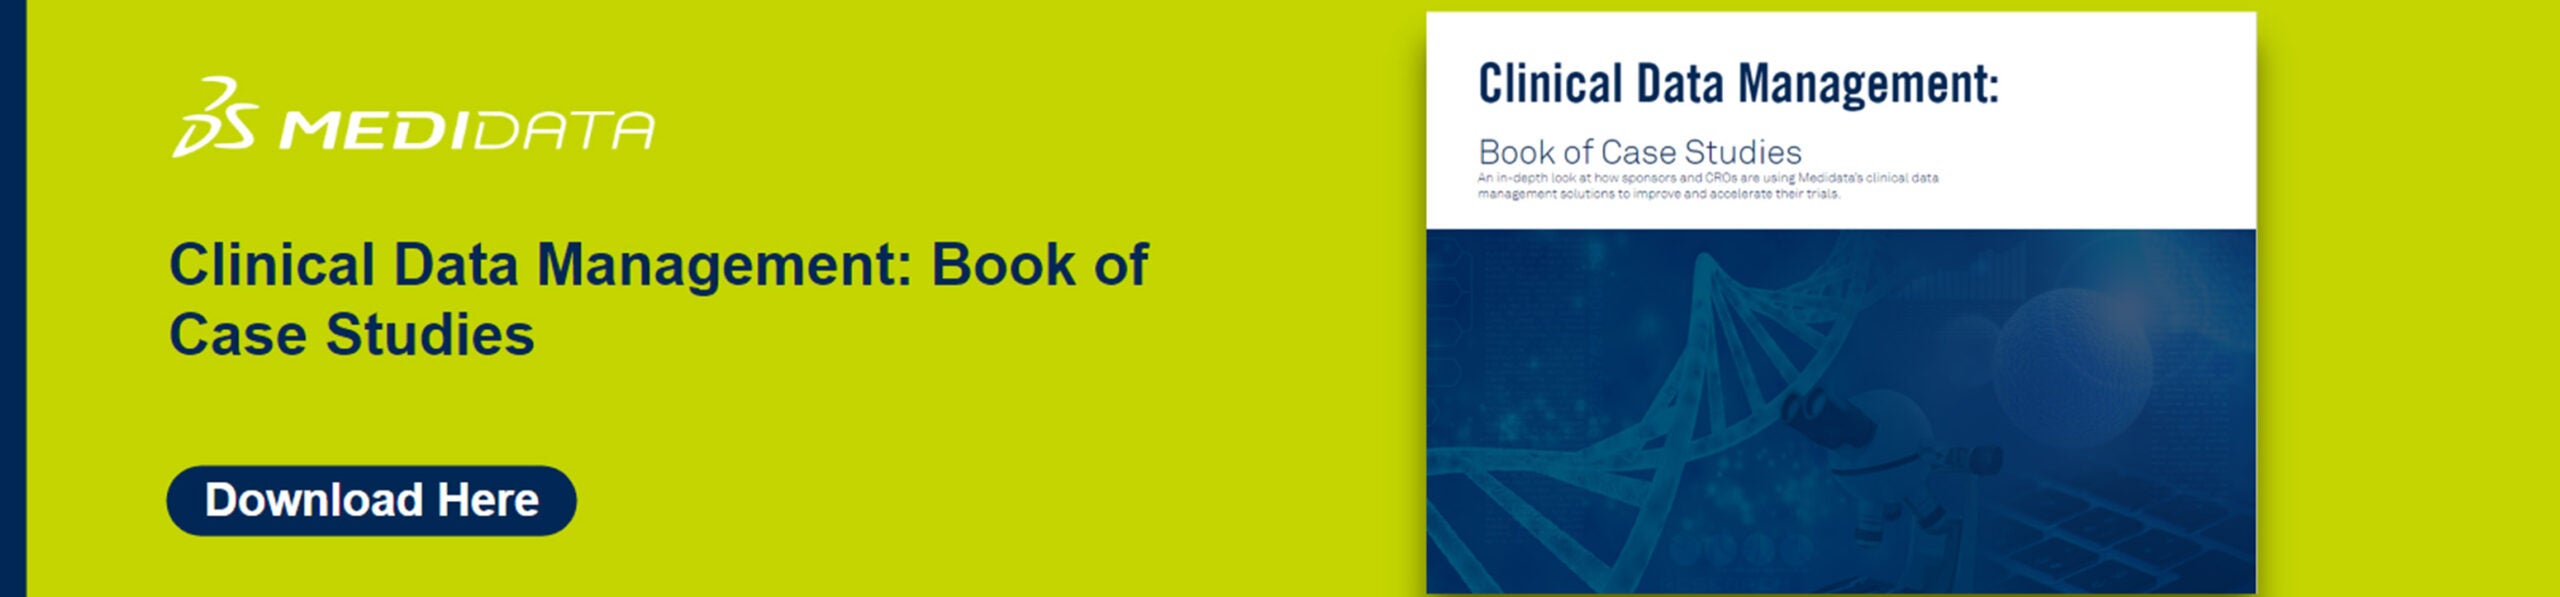 Downloadable eBook of Medidata case studies that improved clinical trial data management processes.